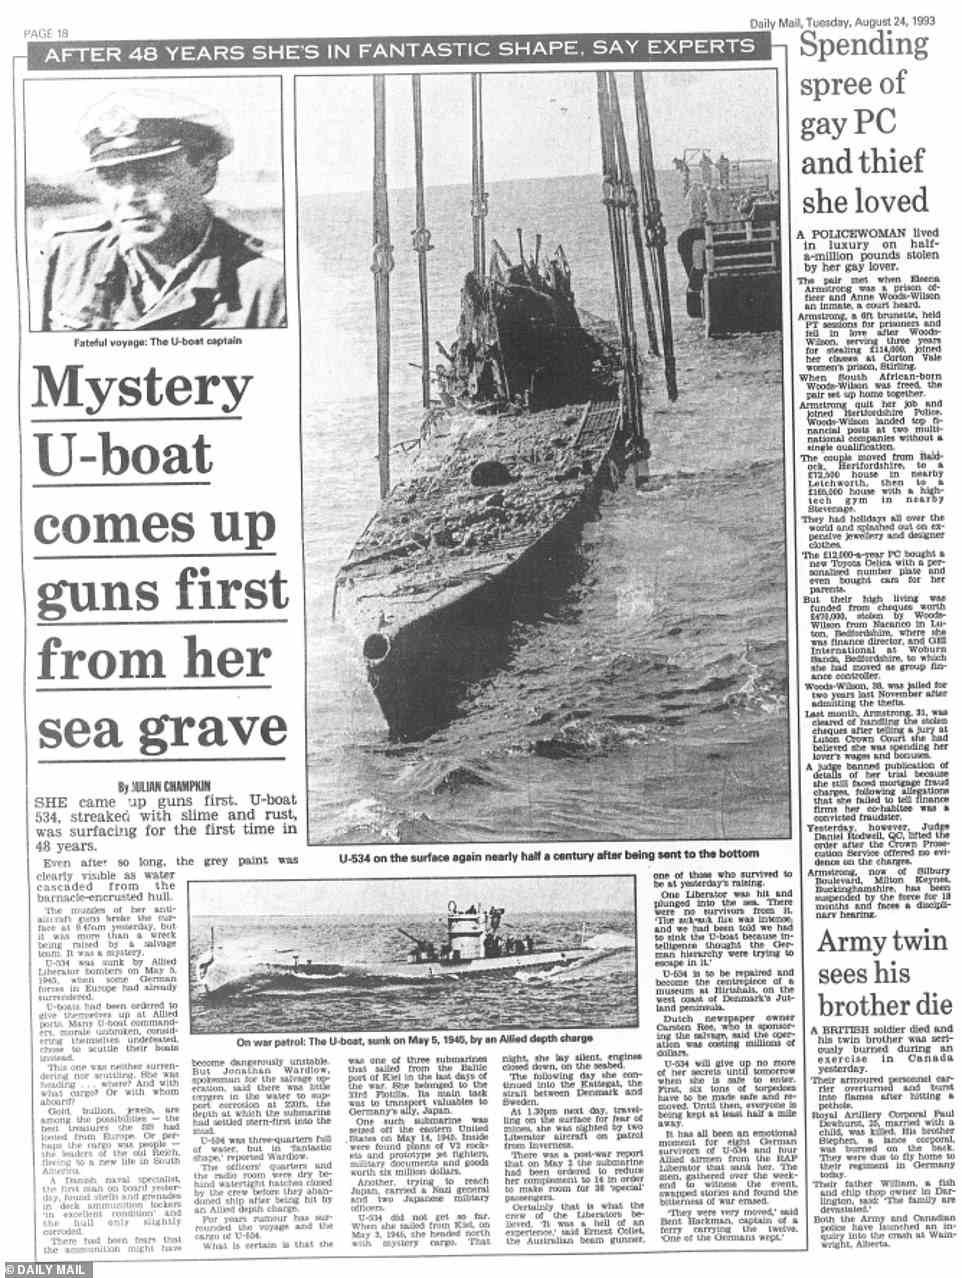 The Daily Mail's coverage of the raising of the submarine reported how it came up 'guns first'. There was speculation at the time that the vessel could have been carrying Nazi gold or other treasures